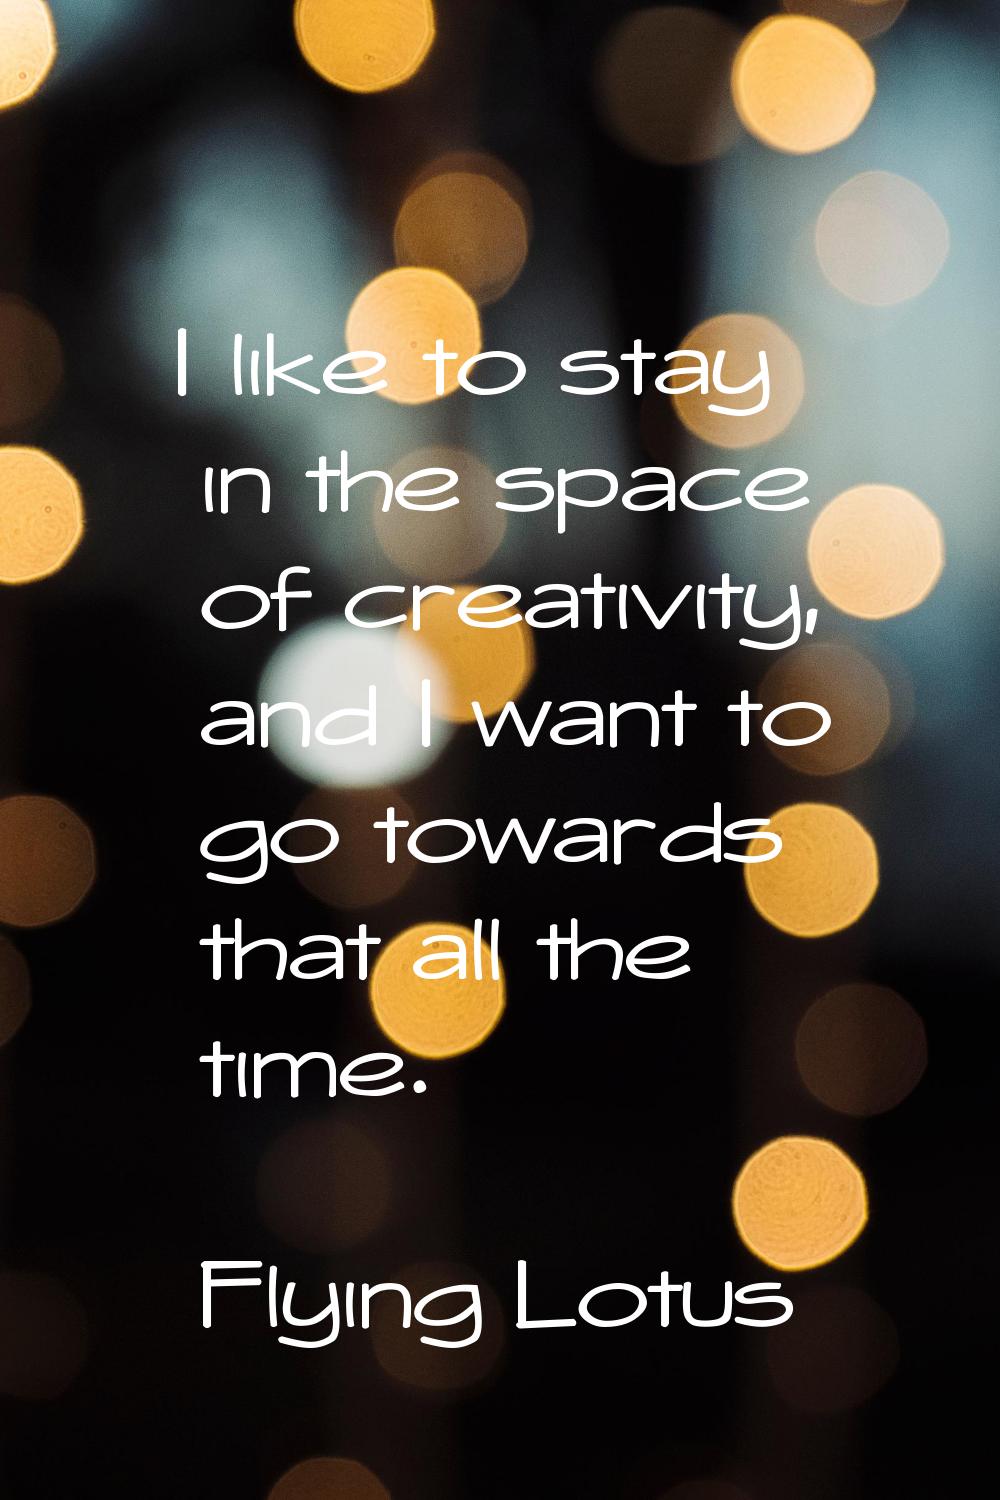 I like to stay in the space of creativity, and I want to go towards that all the time.